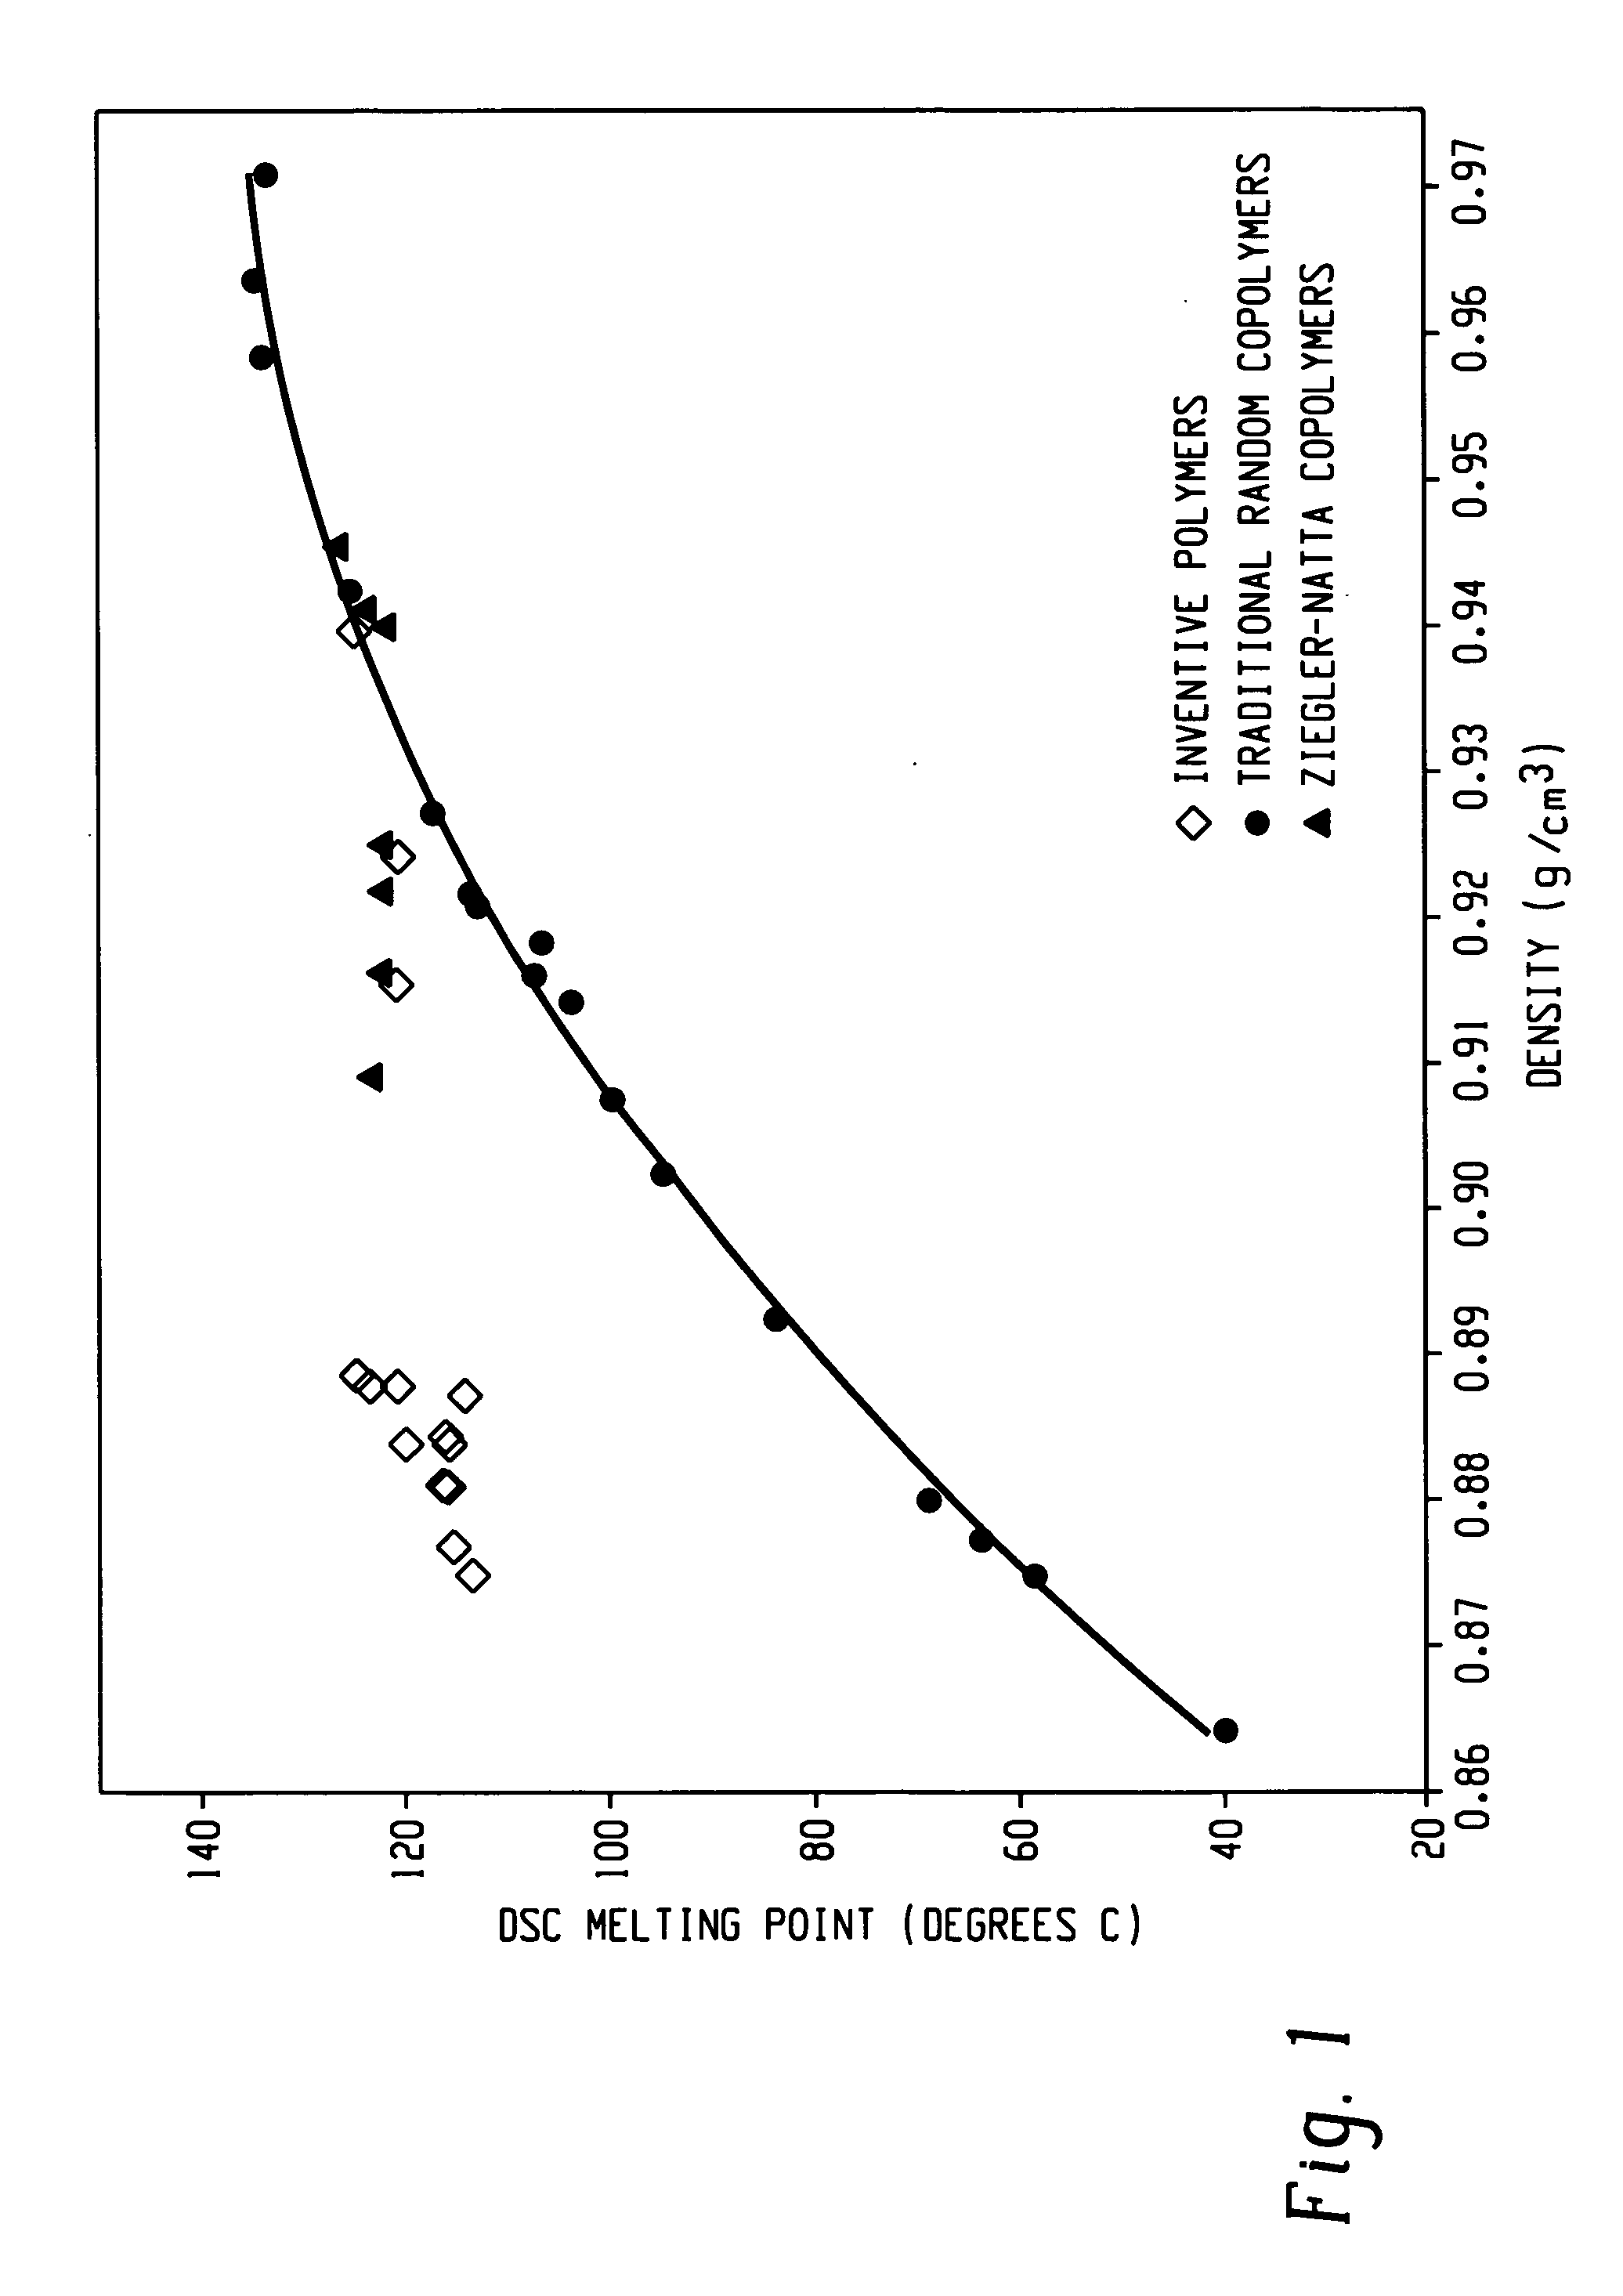 Filled polymer compositions made from interpolymers of ethylene/a-olefins and uses thereof